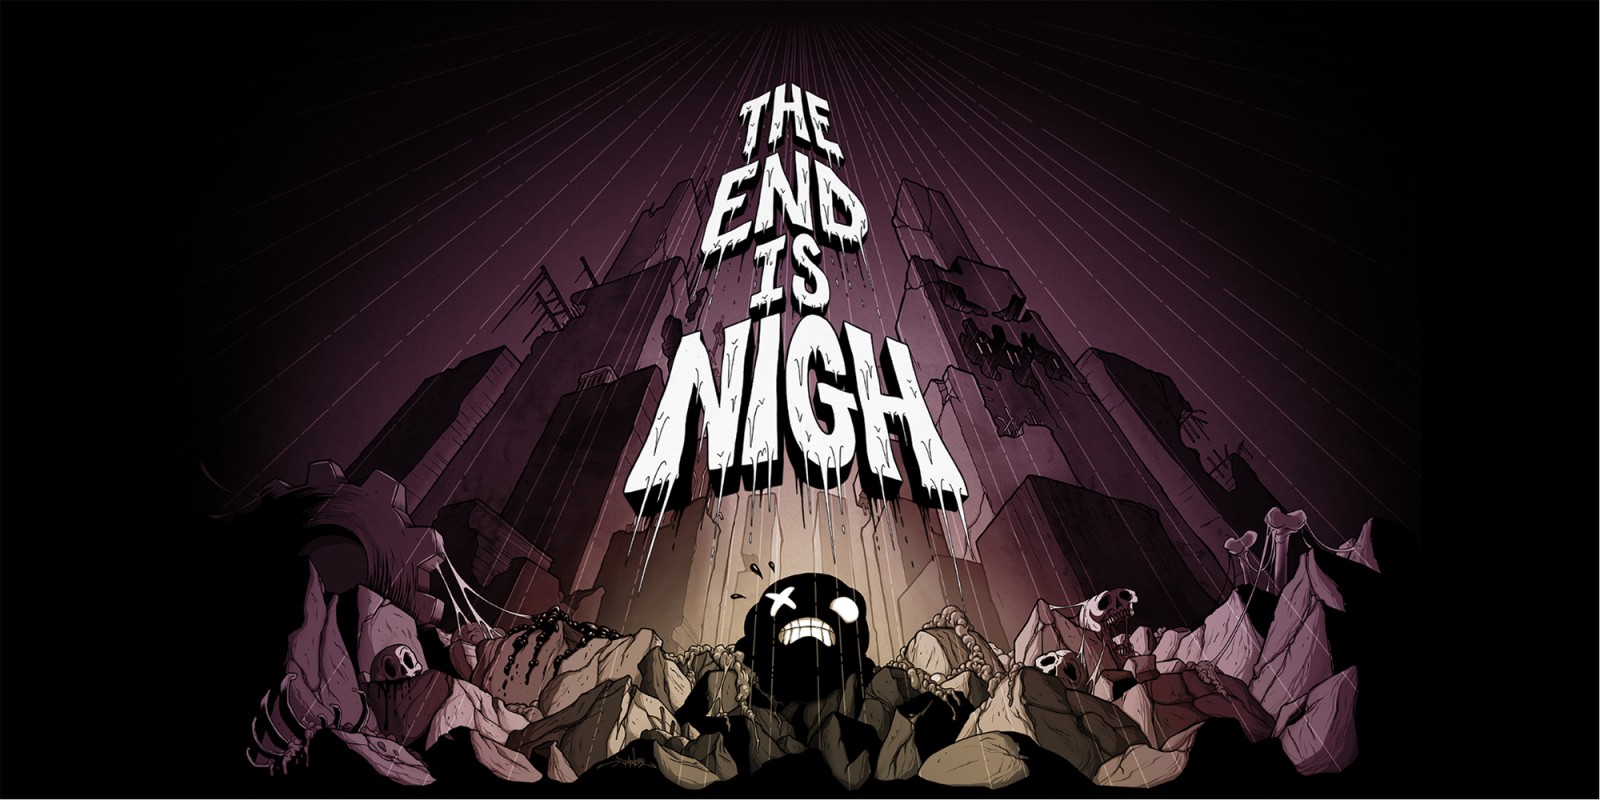 Unmanned maybe enthusiastic The End Is Nigh | Nintendo Switch download software | Games | Nintendo